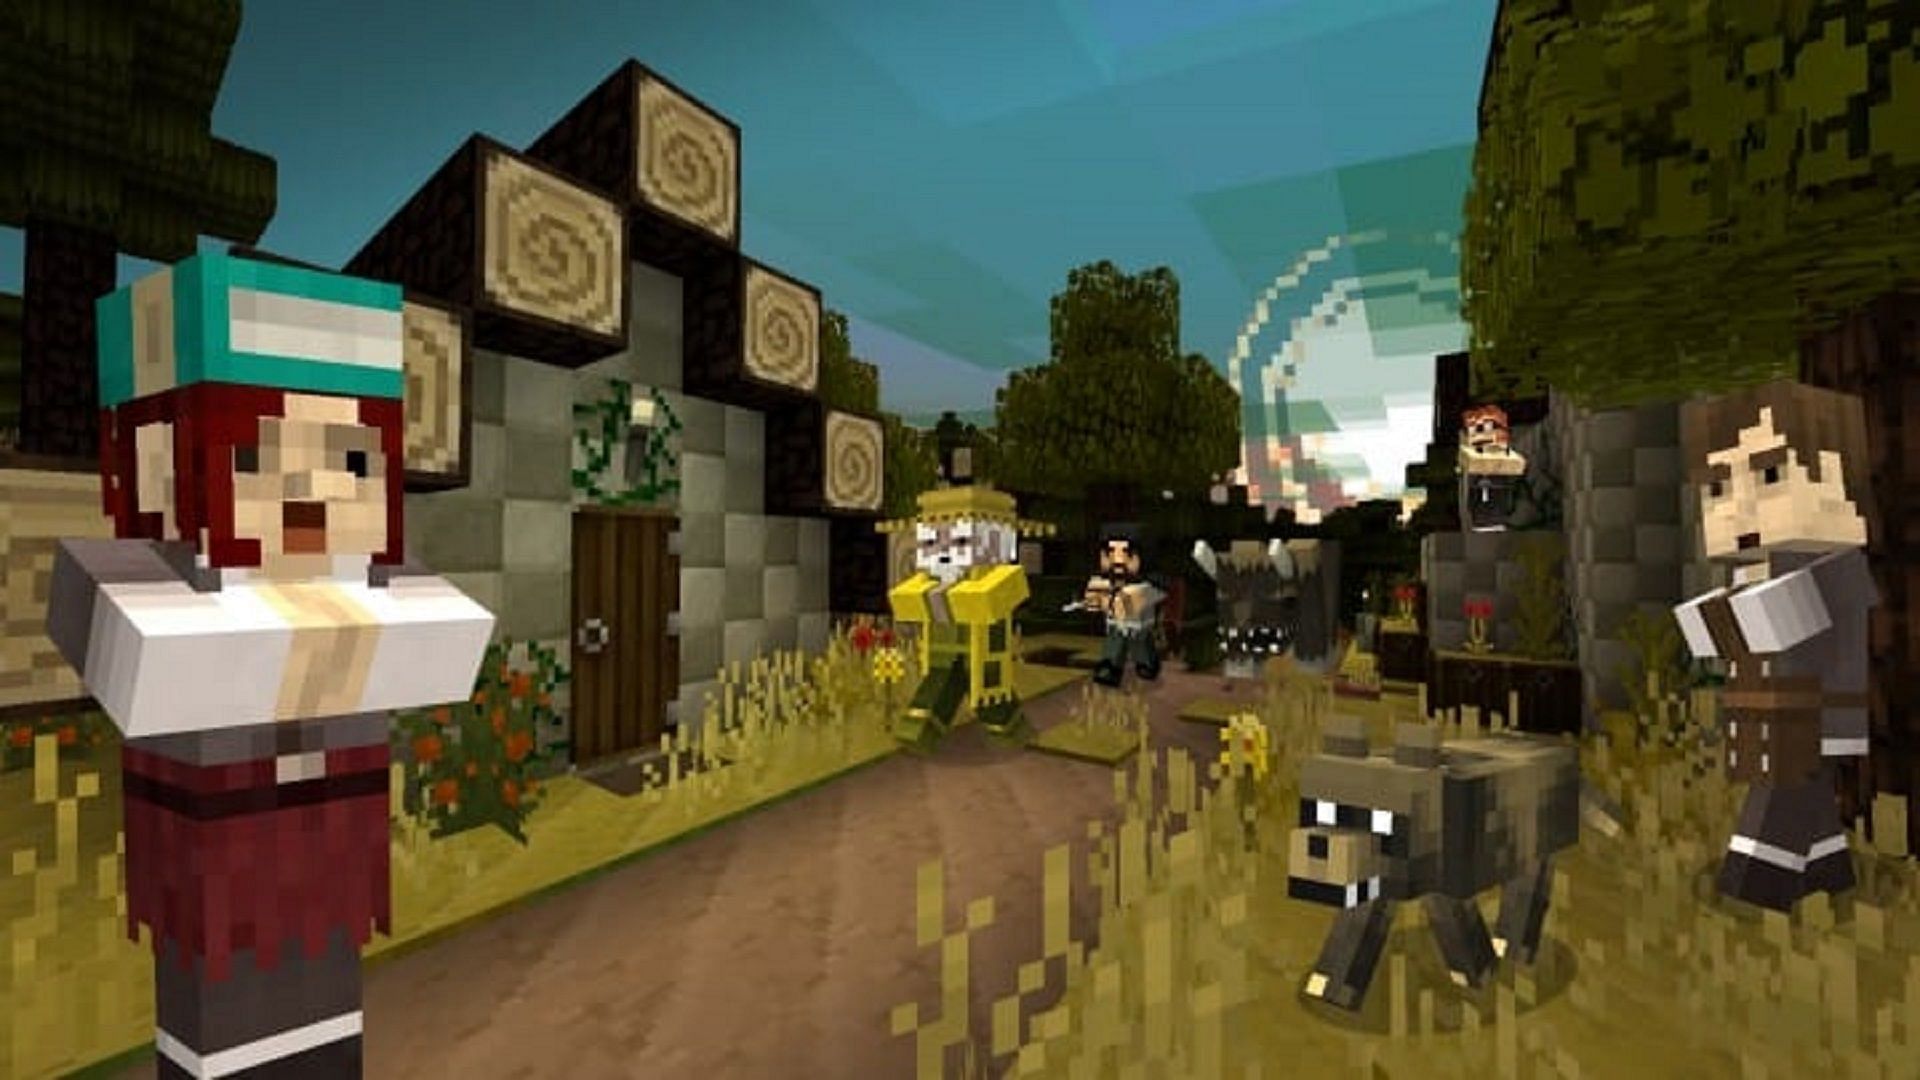 A Minecraft village takes on a whole new life with the Jolicraft texture pack (Image via Adrejolicoeur/Resourcepack.net)